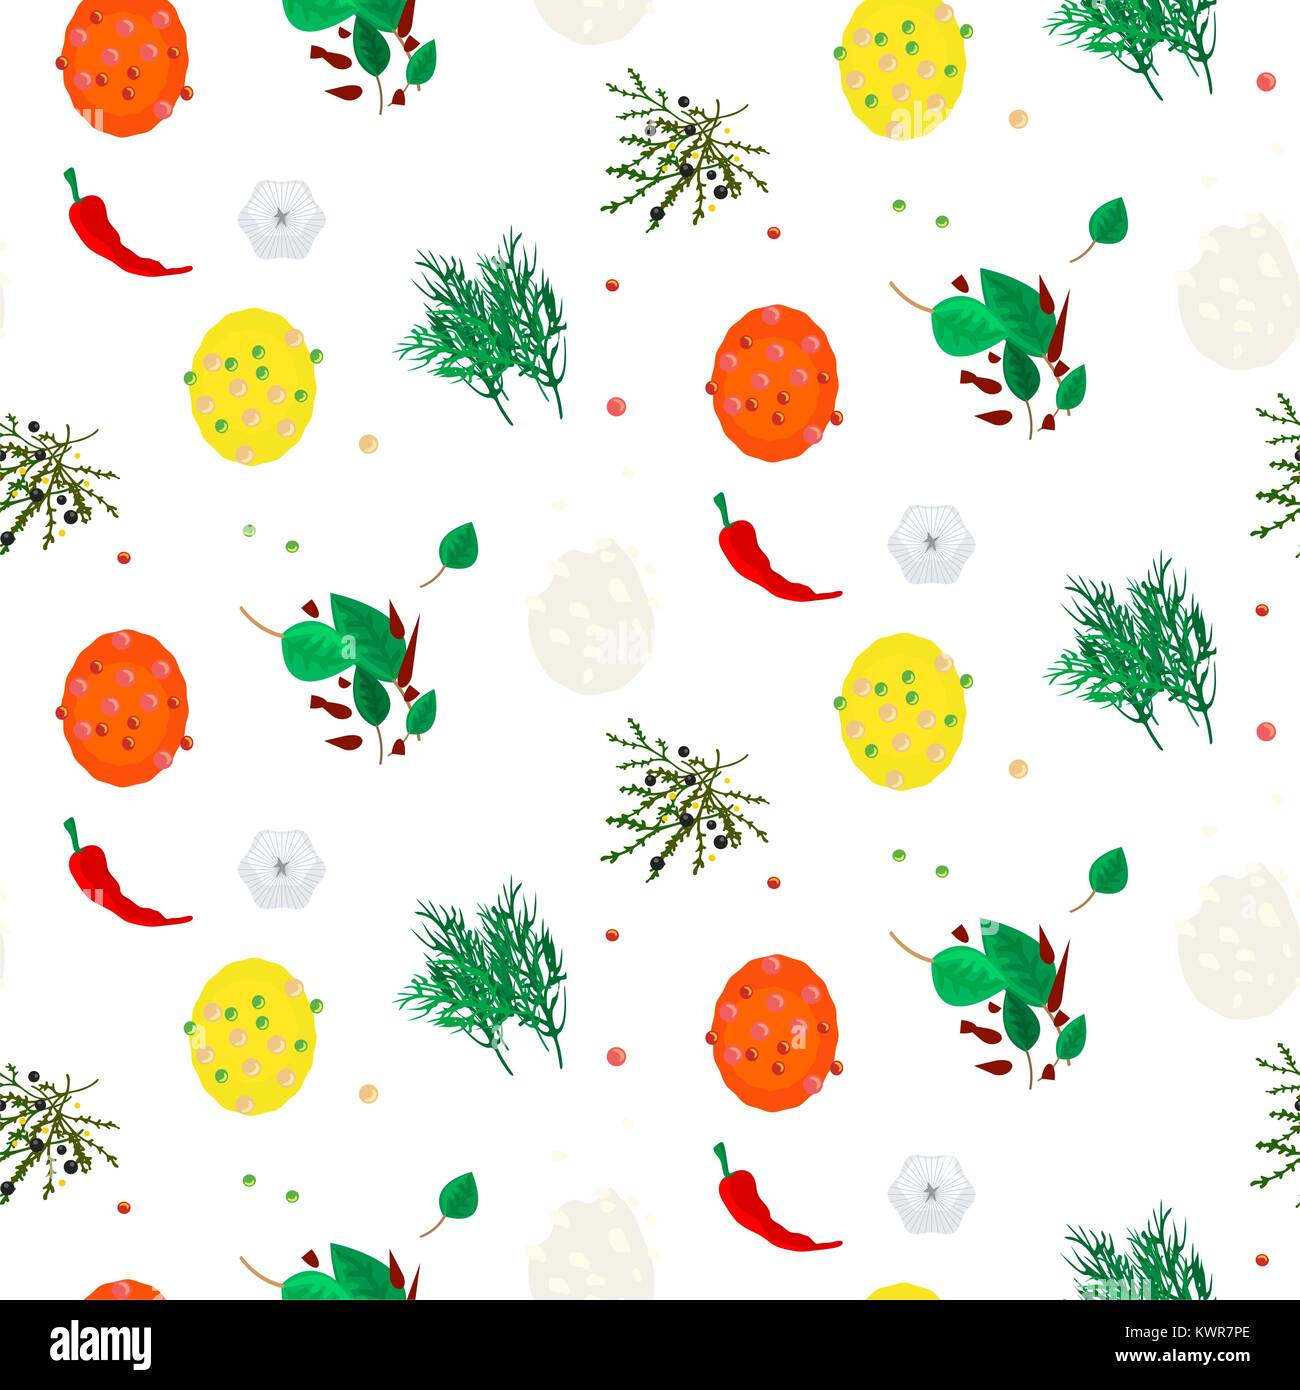 Hot spices vector seamless pattern. Stock Vector